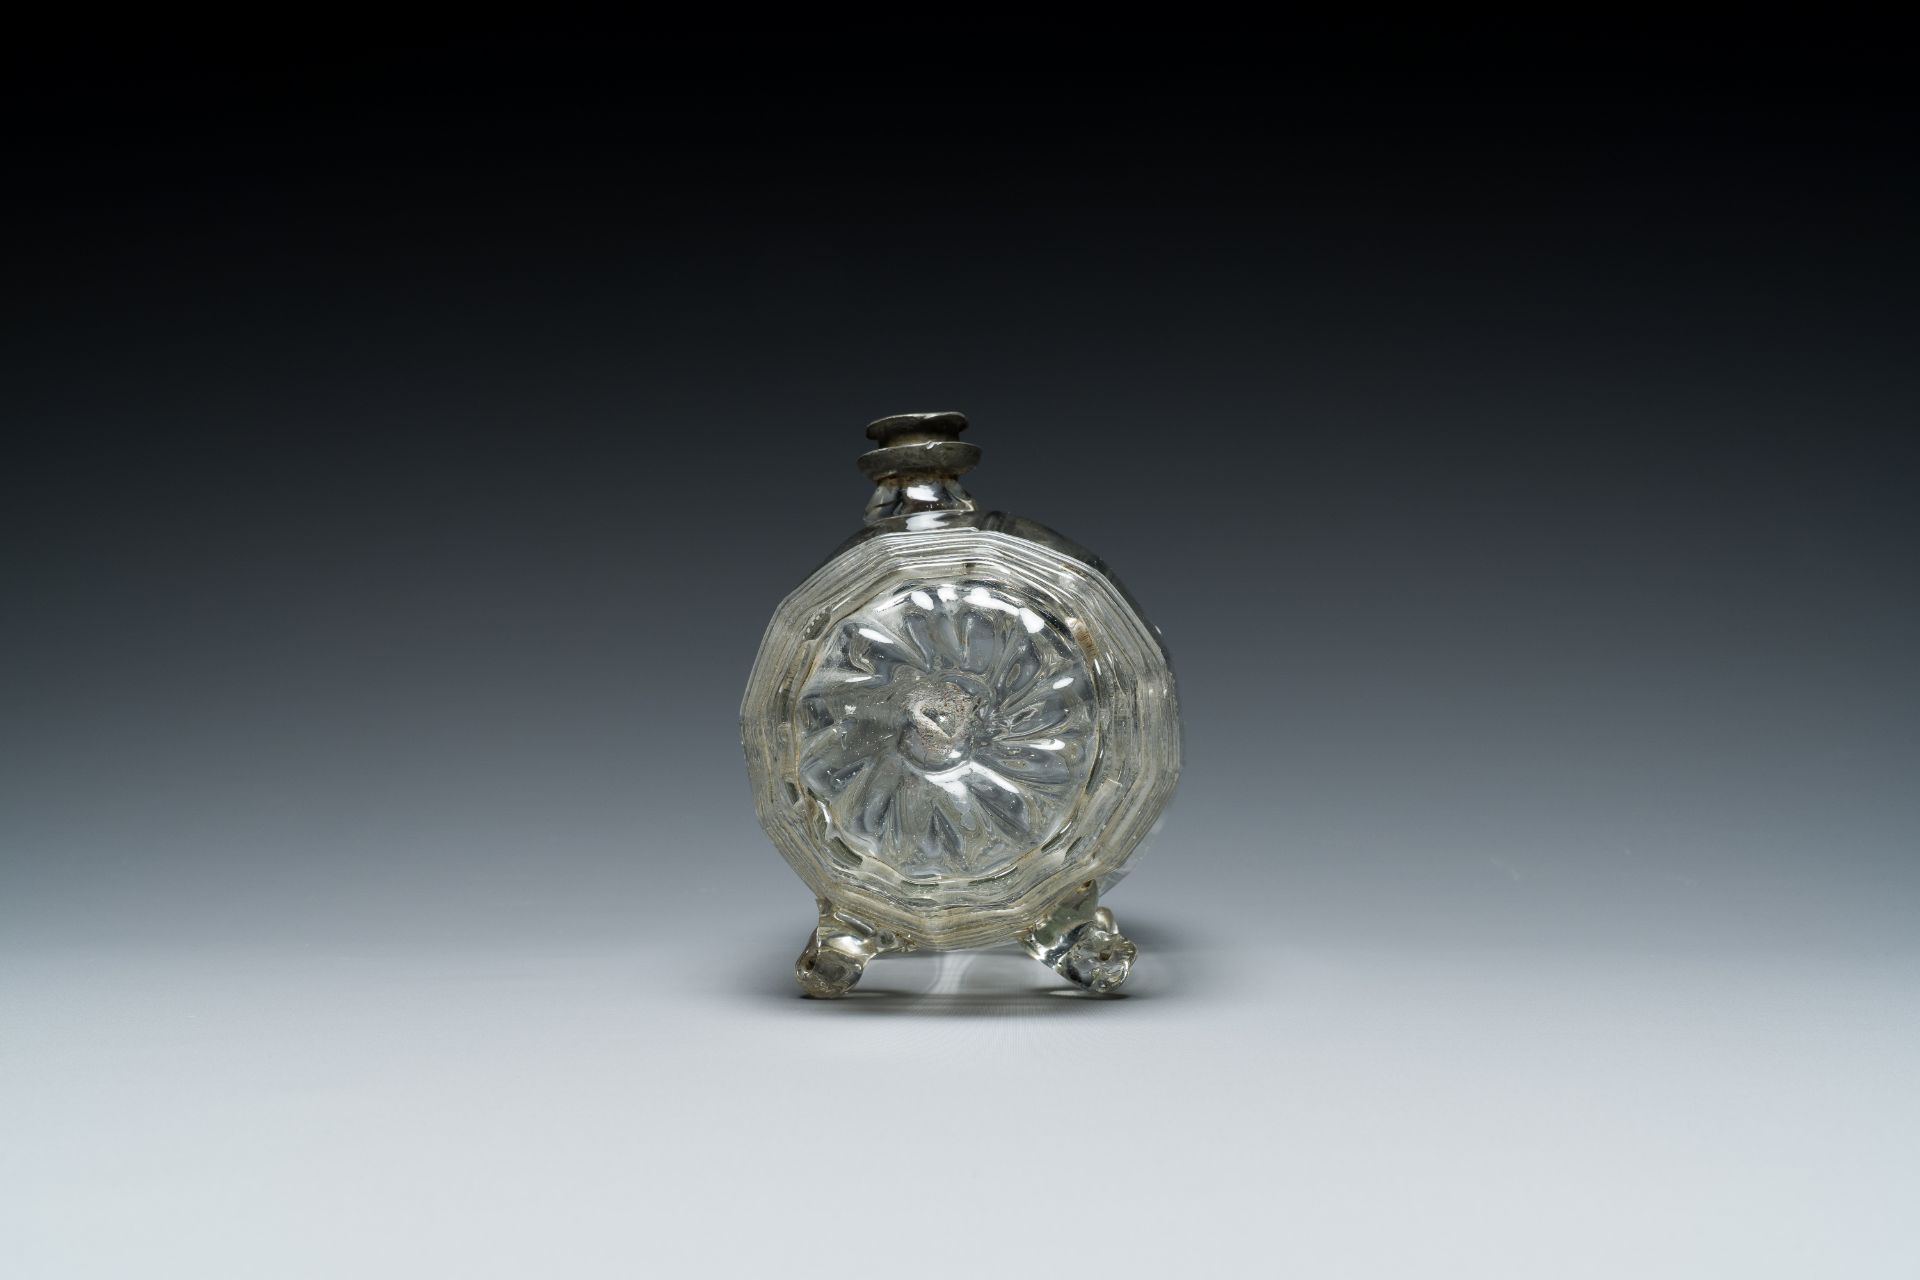 A German barrel-shaped glass bottle with pewter screw cap, 17/18th C. - Image 5 of 7